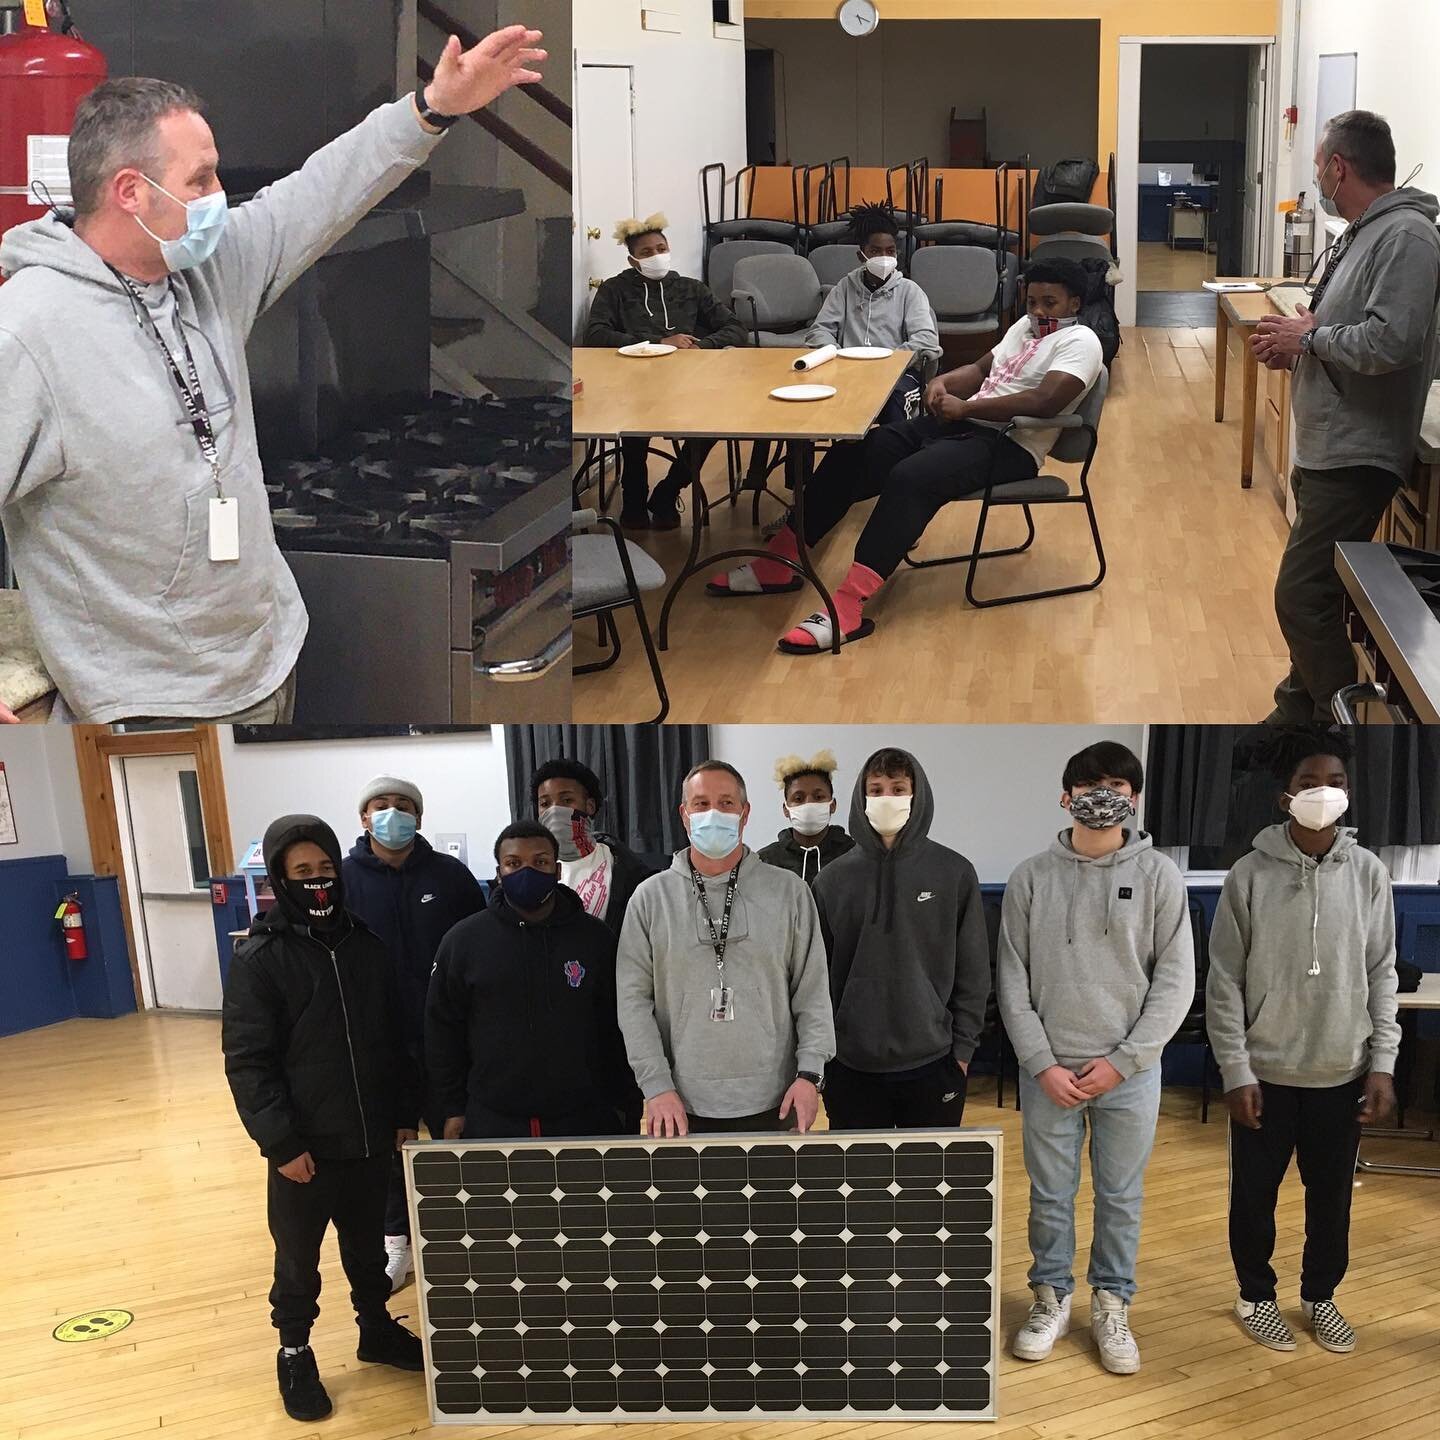 Thanks to Mr Carlo Vidrini, Peekskill High Faculty for joining us to lead our effort to make portable solar power supply cans! Donations to purchase supplies needed! Mmcdonaldbdas@Gmail.com